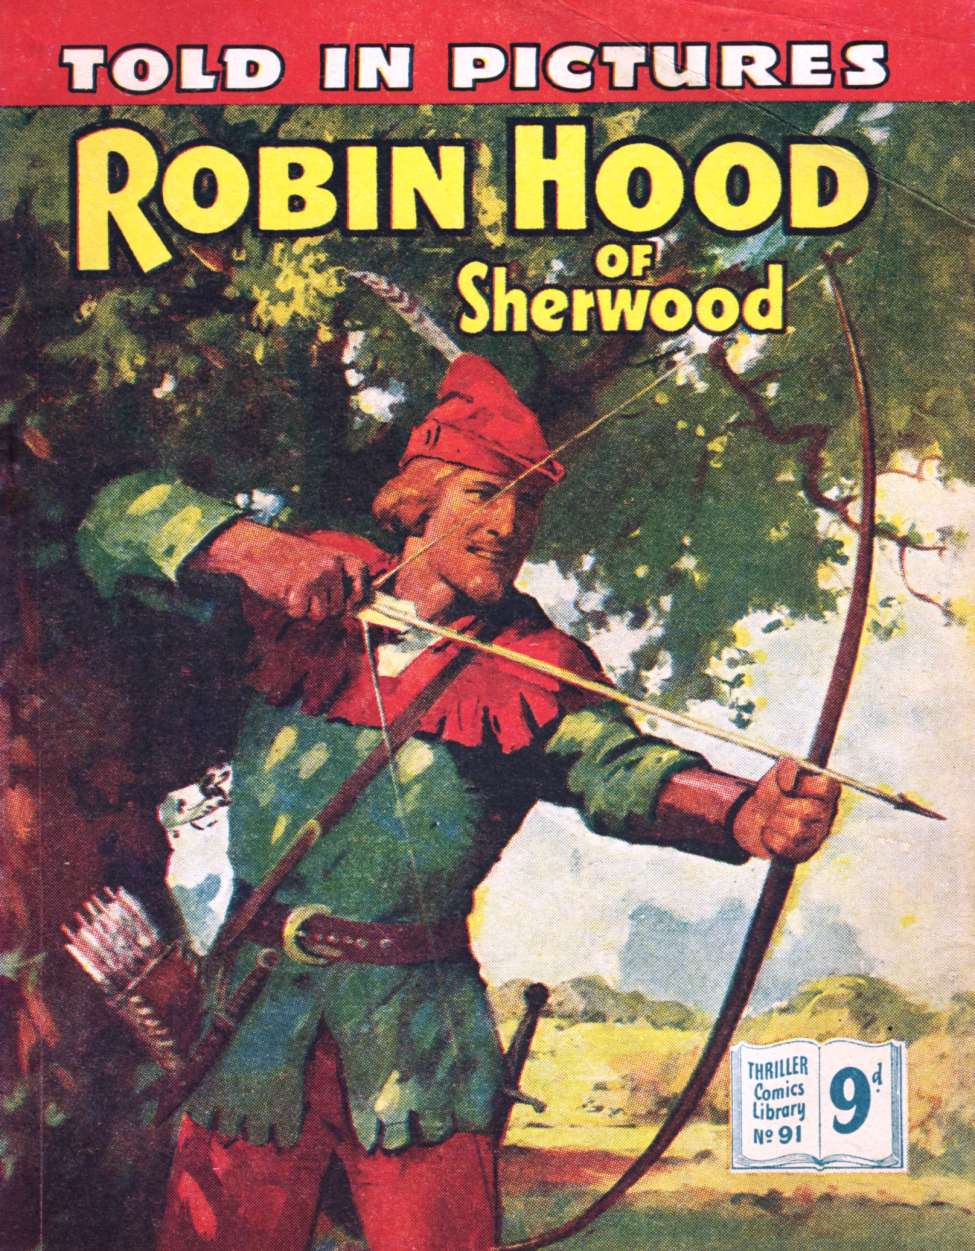 Comic Book Cover For Thriller Comics Library 91 - Robin Hood of Sherwood